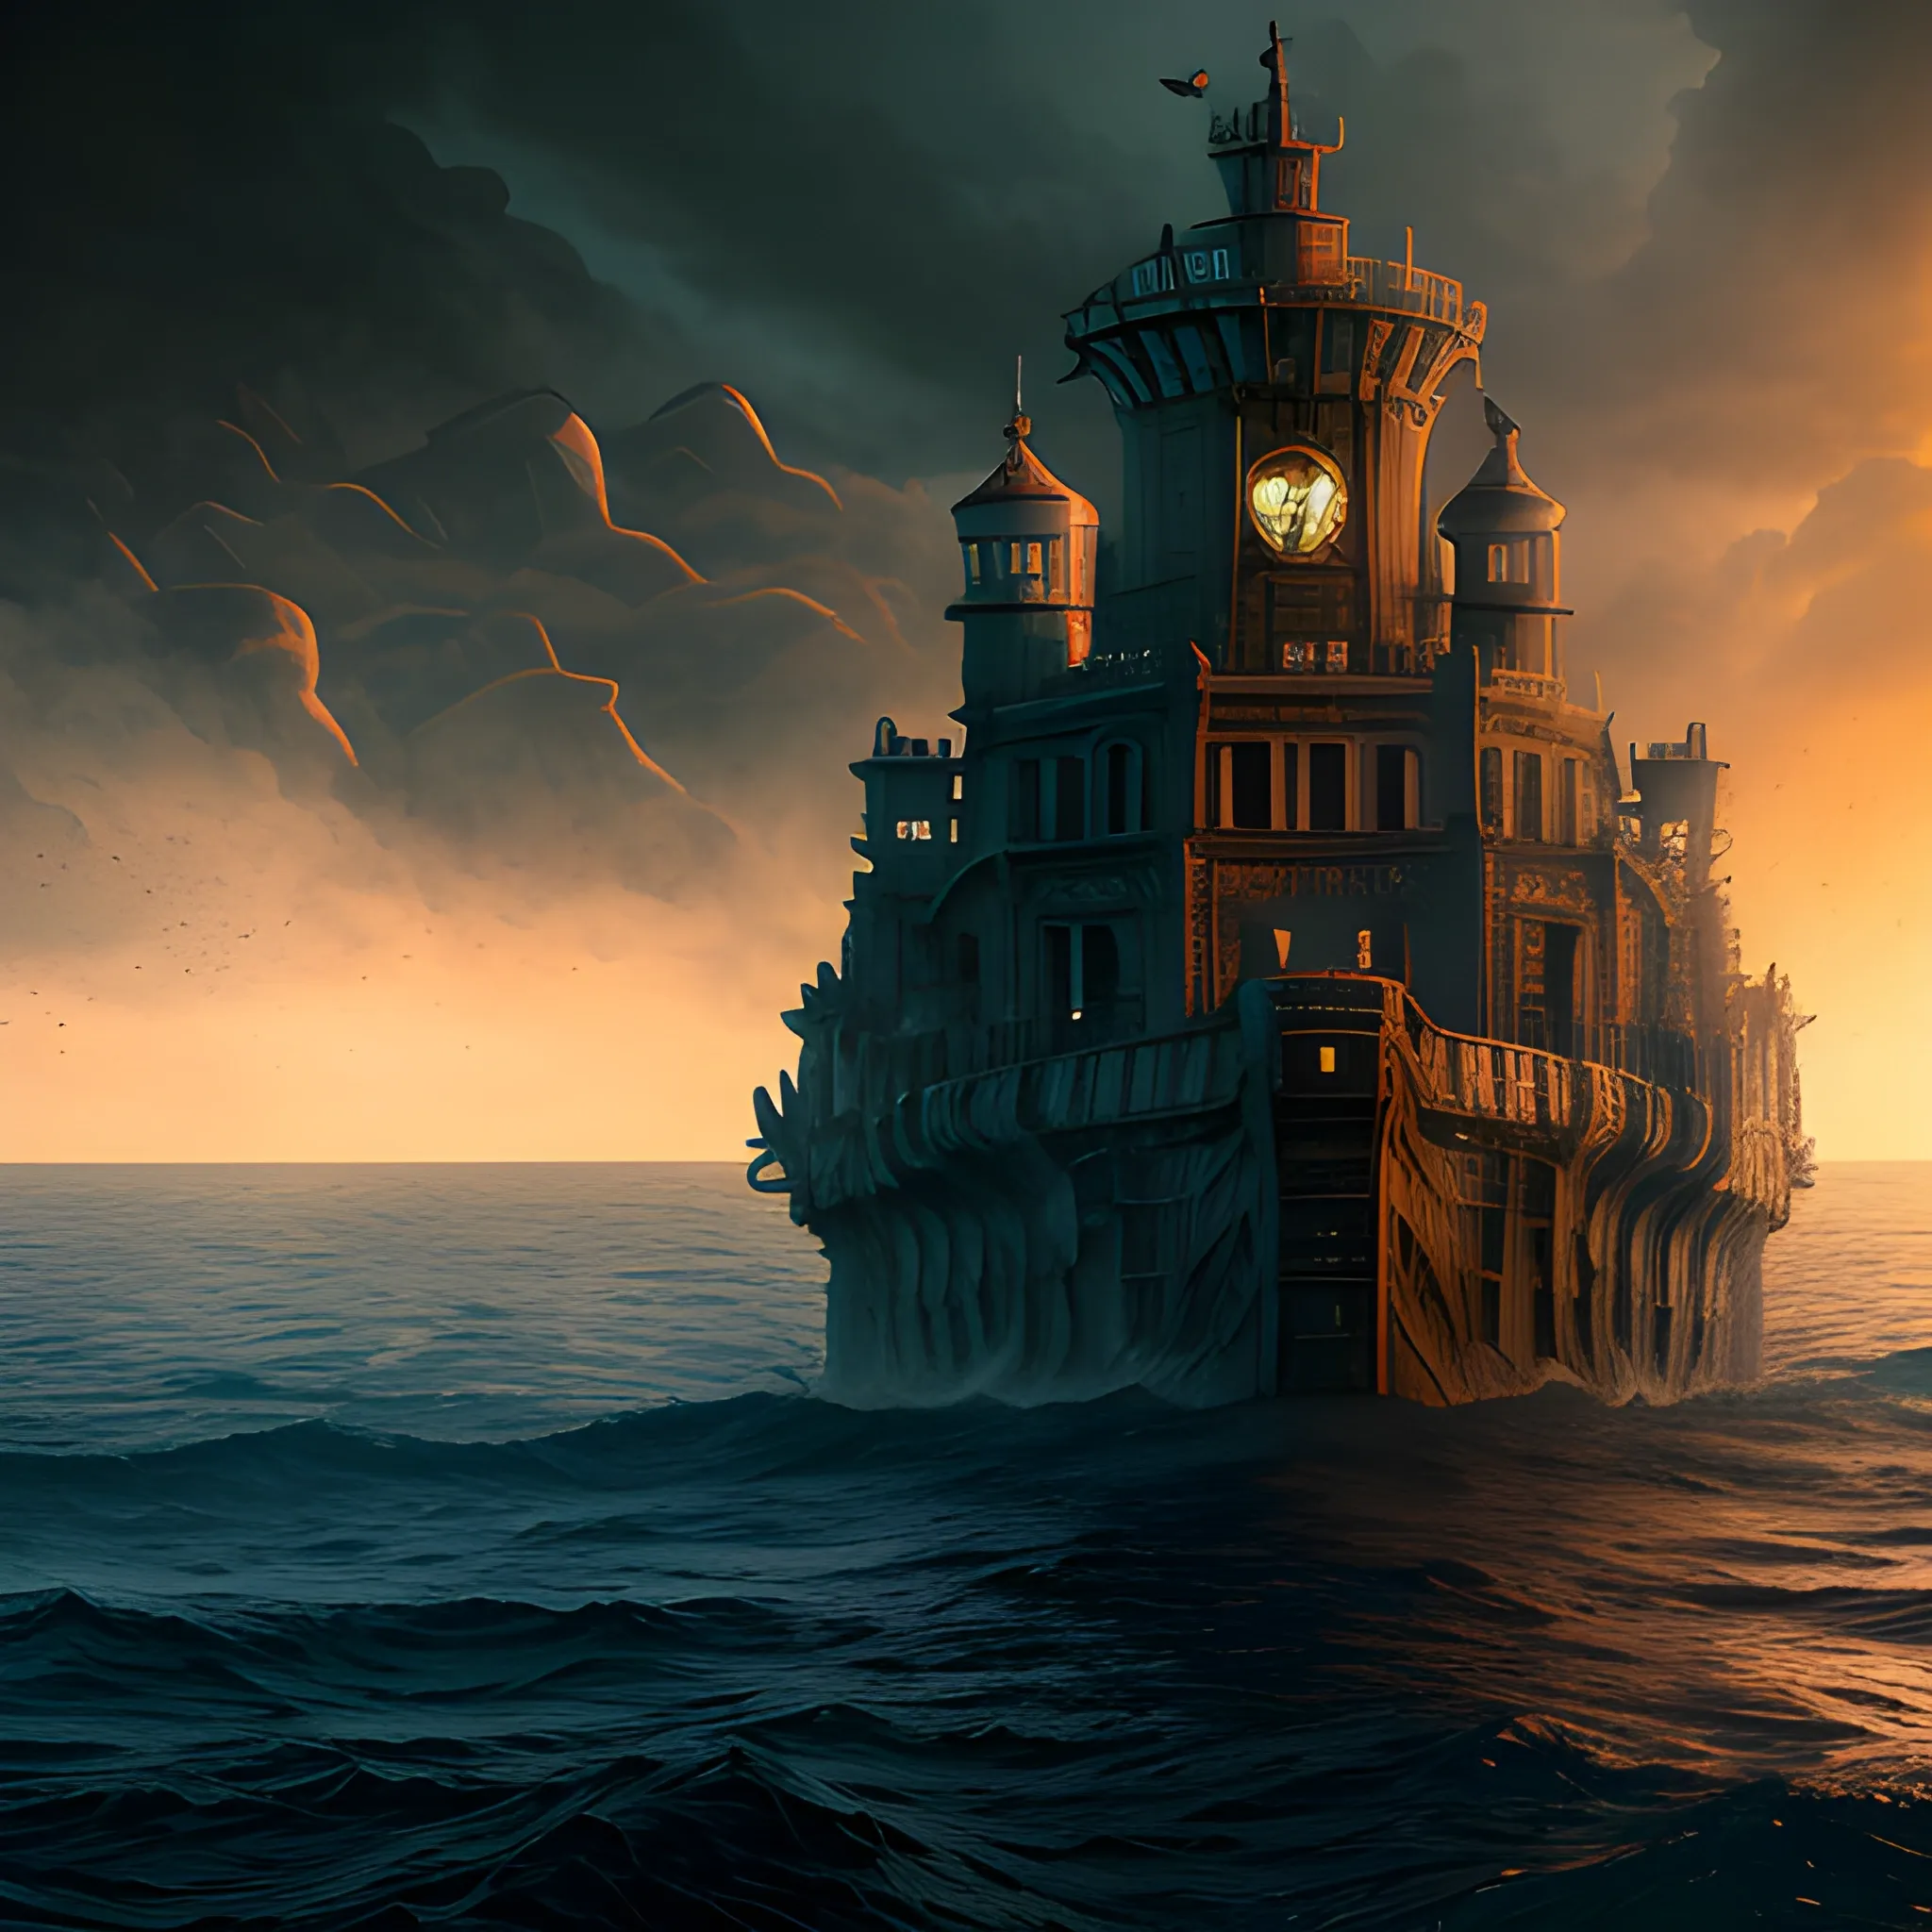 city of the present time sunk at the bottom of the sea, the water is dark, there is little light and shadows and silhouettes of sea monsters can be seen, insane detail, Detailed, 8k, realistic matte painting with photorealistic hdr volumetric lighting